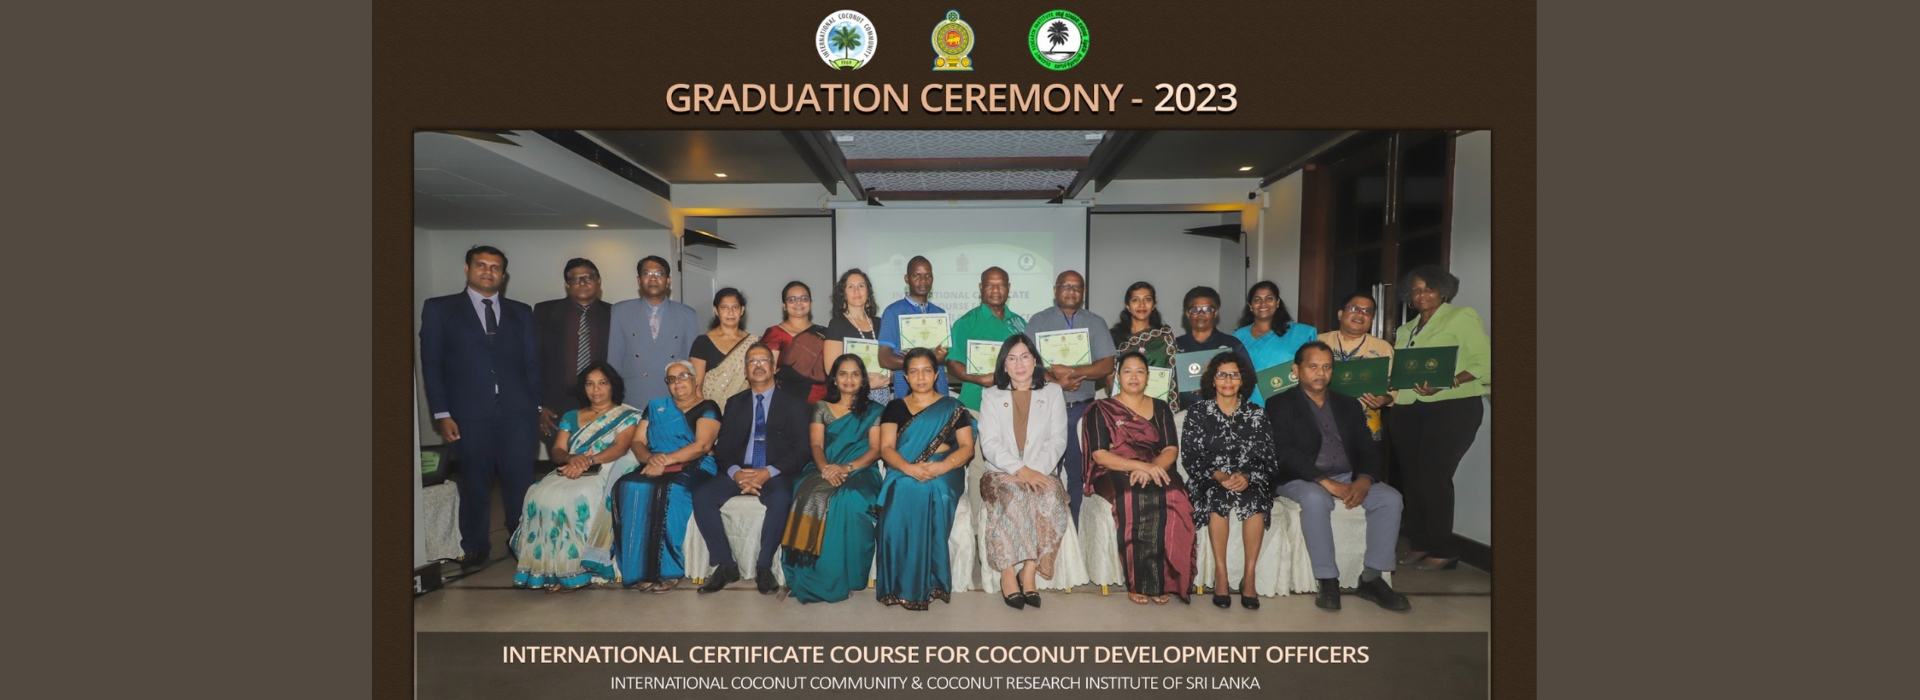 graduation-ceremony-of-the-3rd-international-certificate-course-at-coconut-research-institute-sri-lanka20230803081737.png